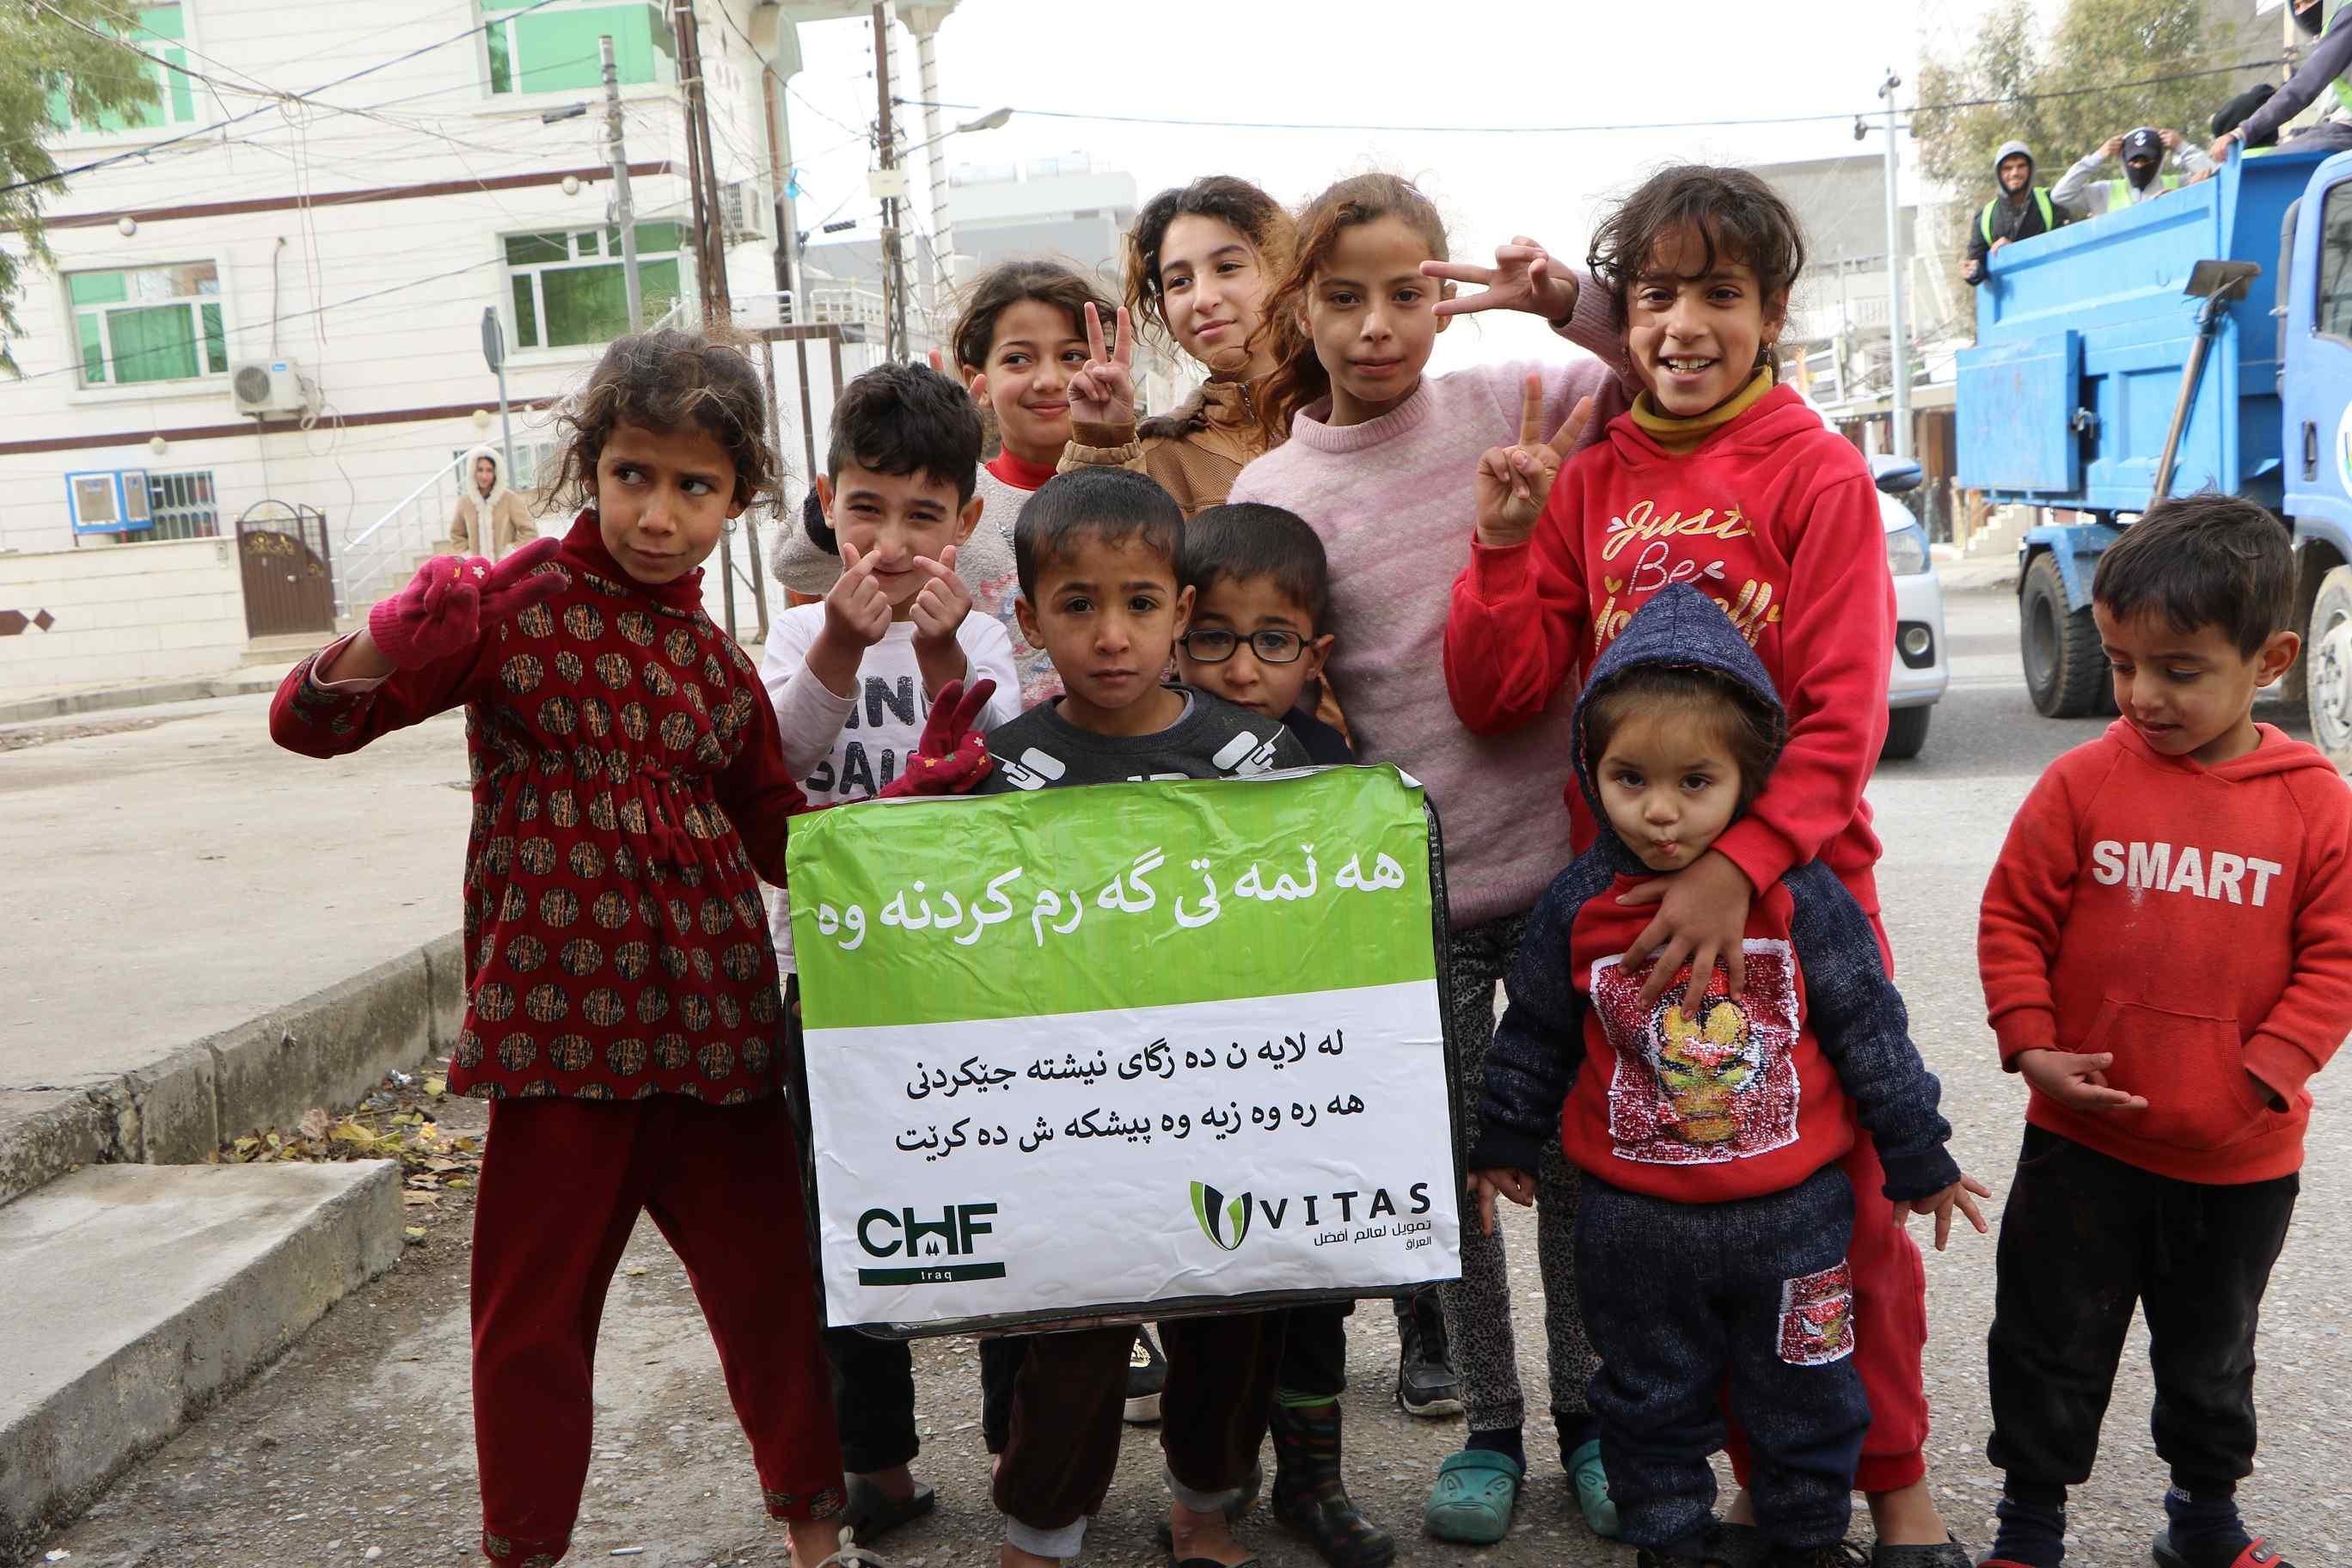 community events - Warmth campaign- Sulaymaniyah